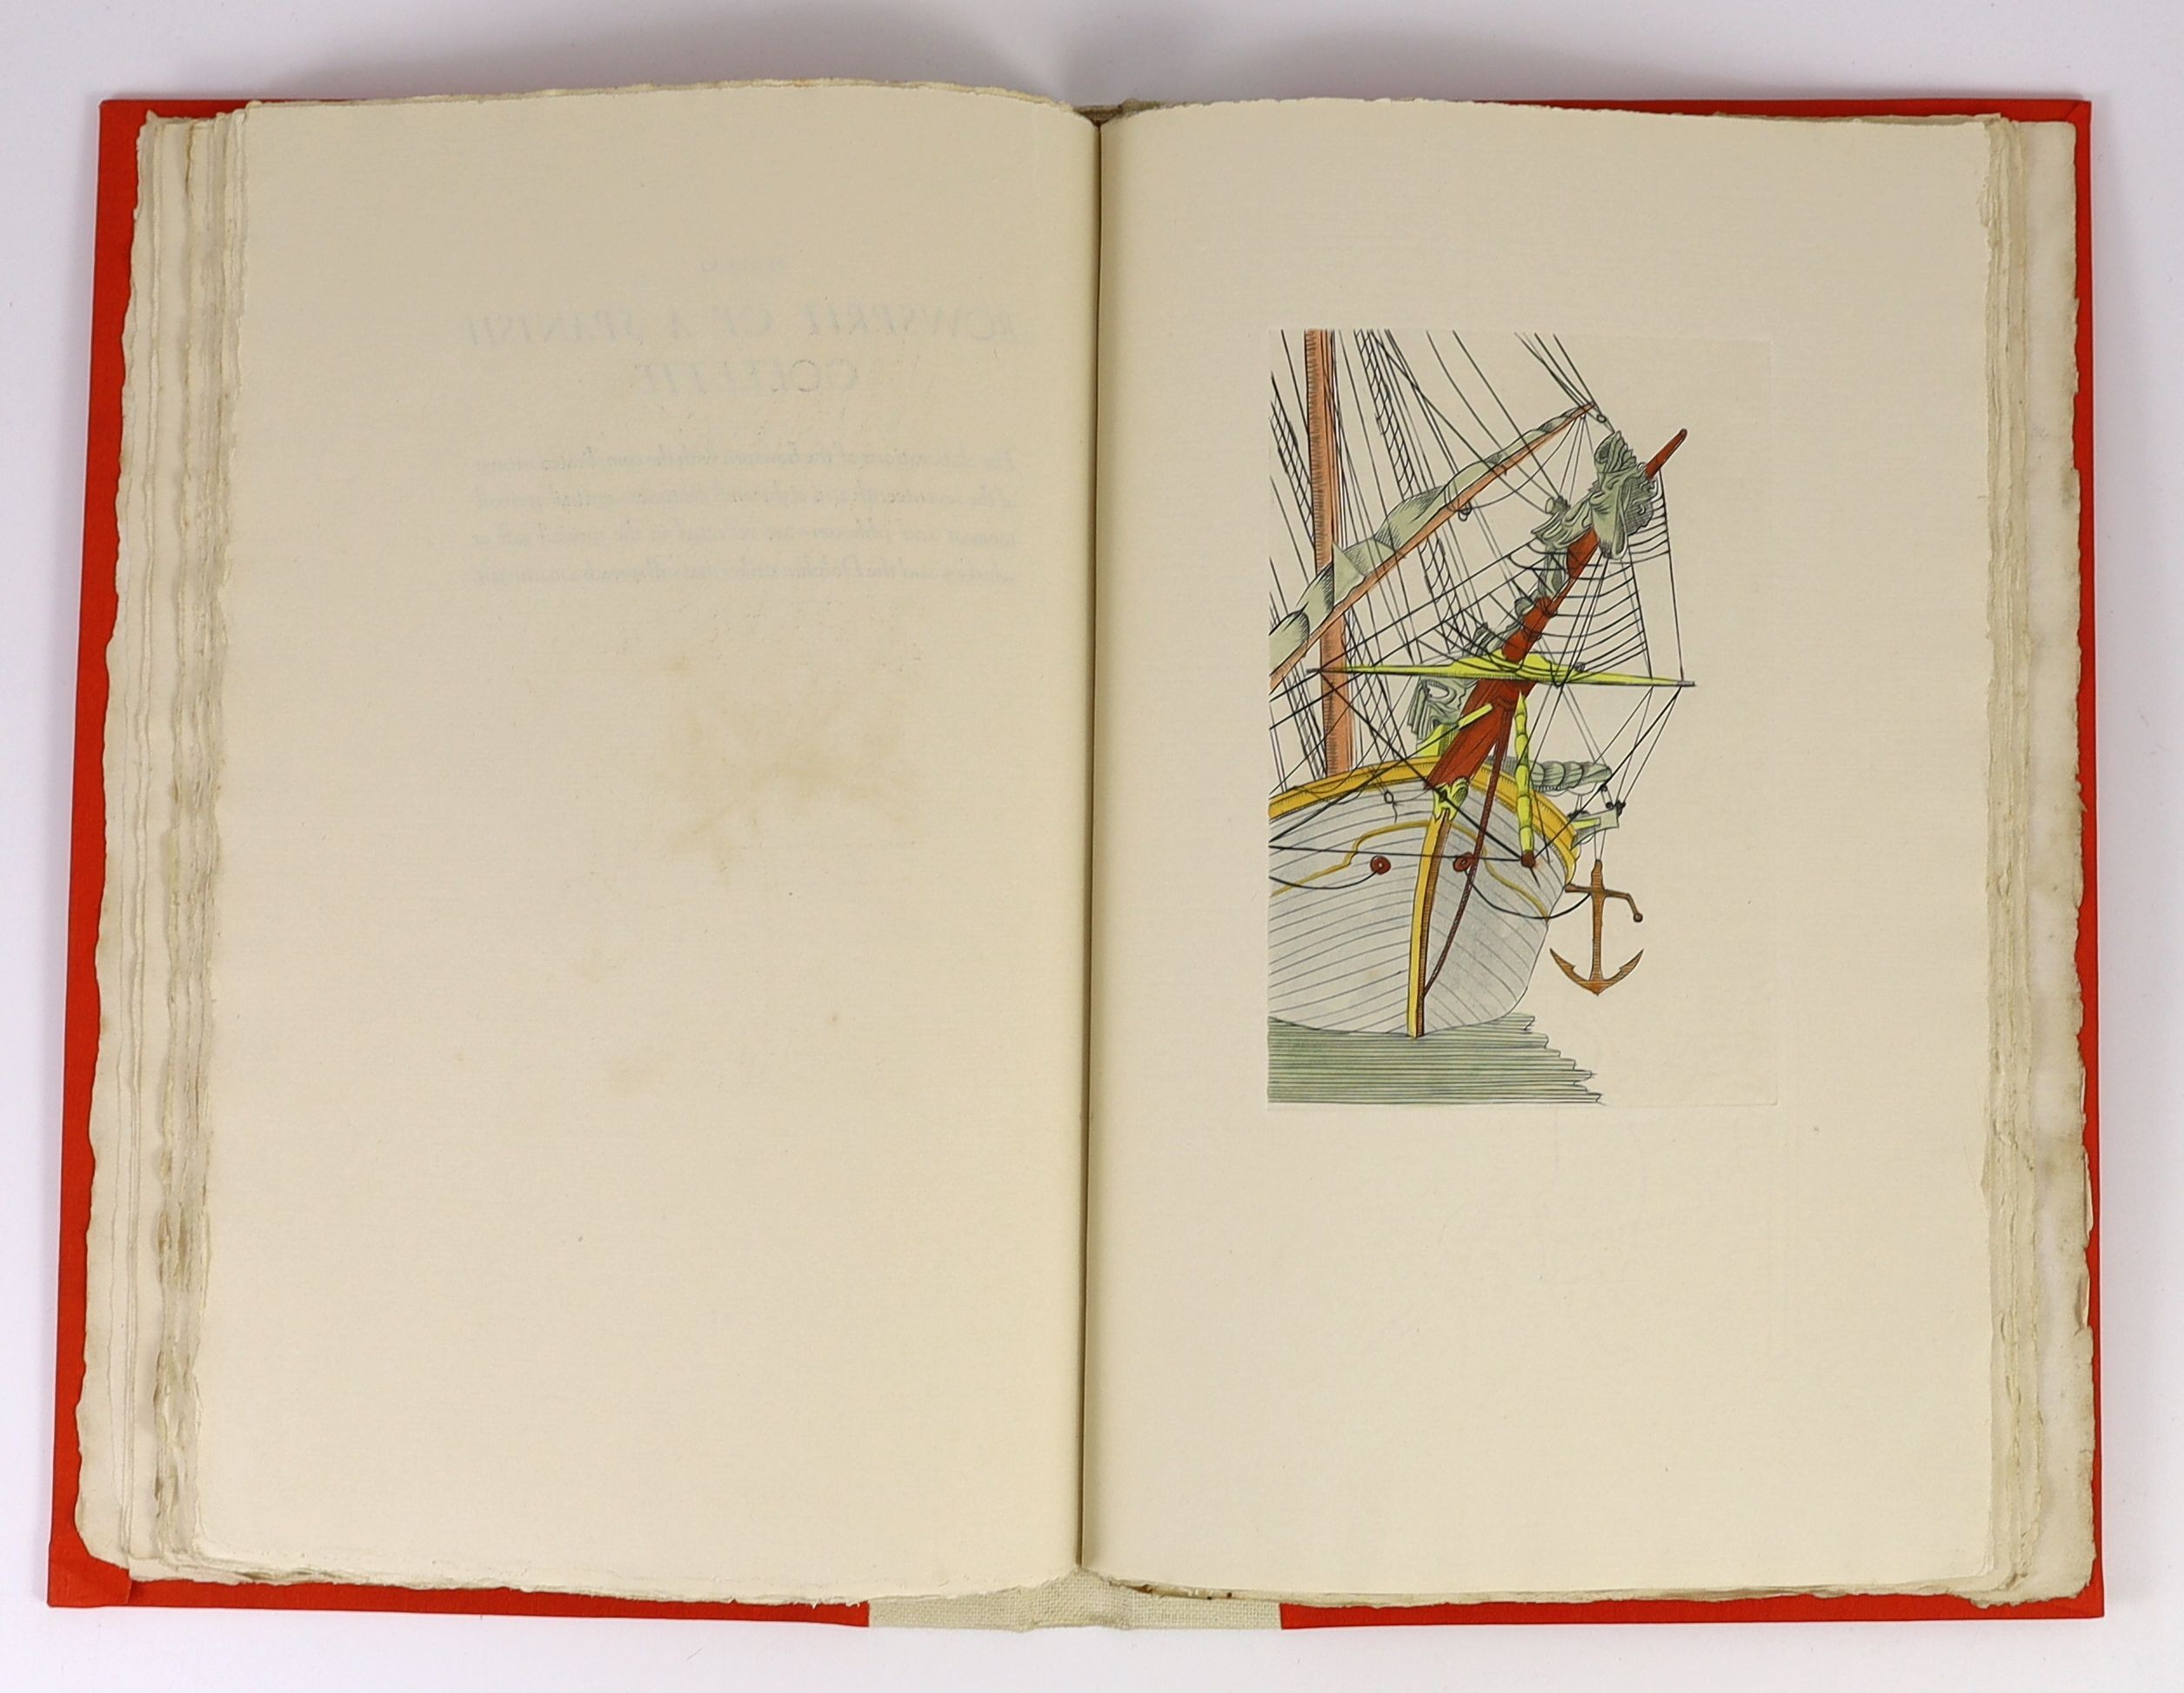 Wadsworth, Edward - Sailing Ships and Barges of the Western Mediterranean and Arctic Seas. 1st and limited edition, No.312 of 450. Complete with 18 copper plates by Edward Wadsworth, many of which have been hand coloured